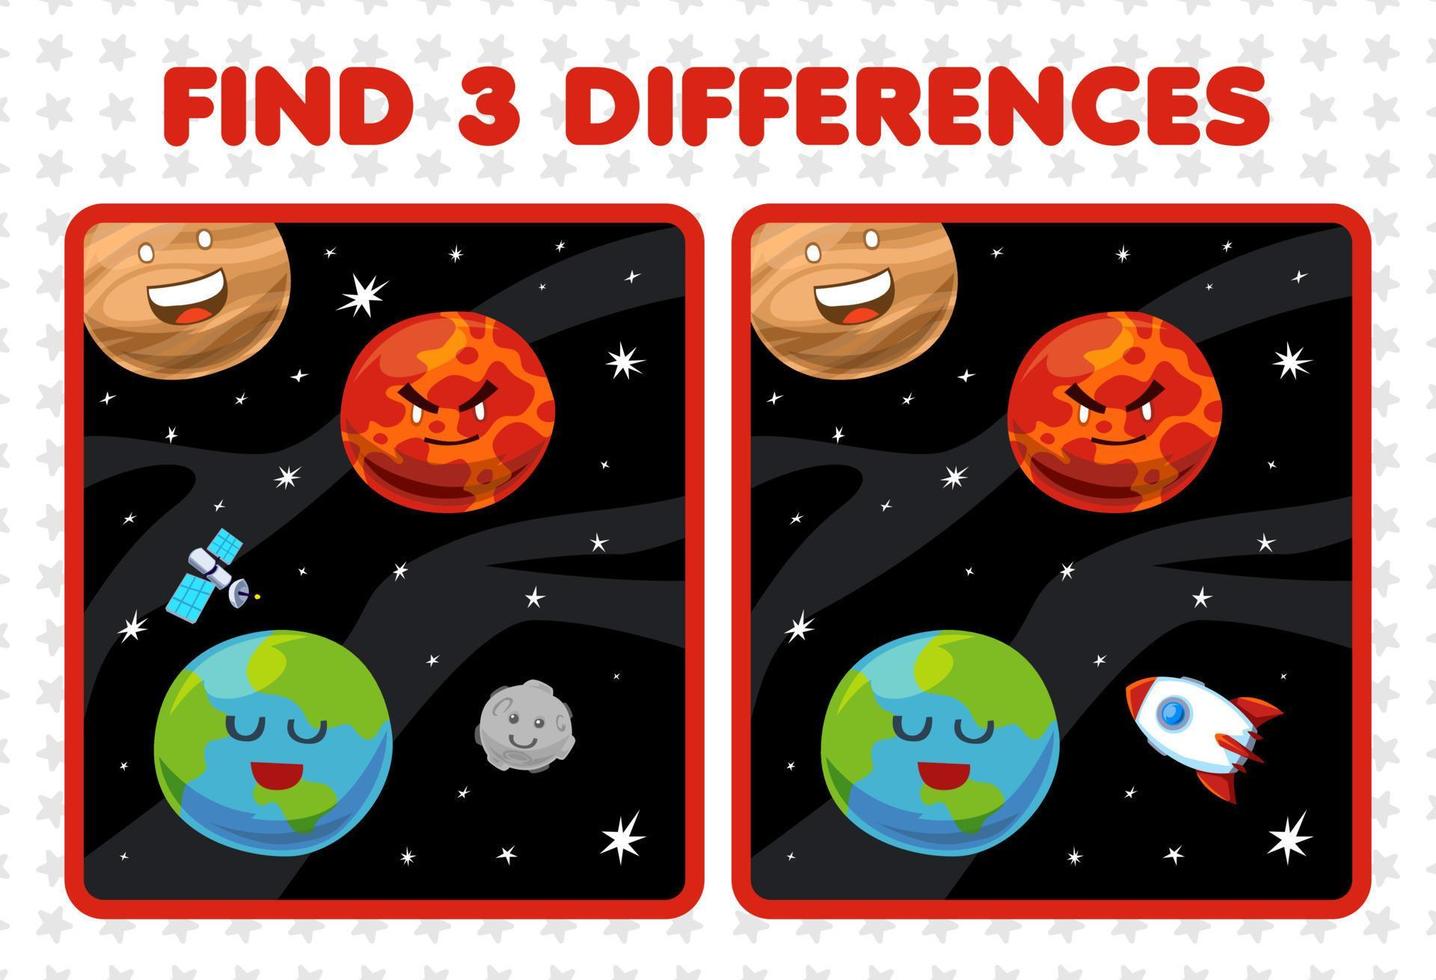 Education game for children find three differences between two cute cartoon solar system earth mars jupiter planet moon rocket satellite vector